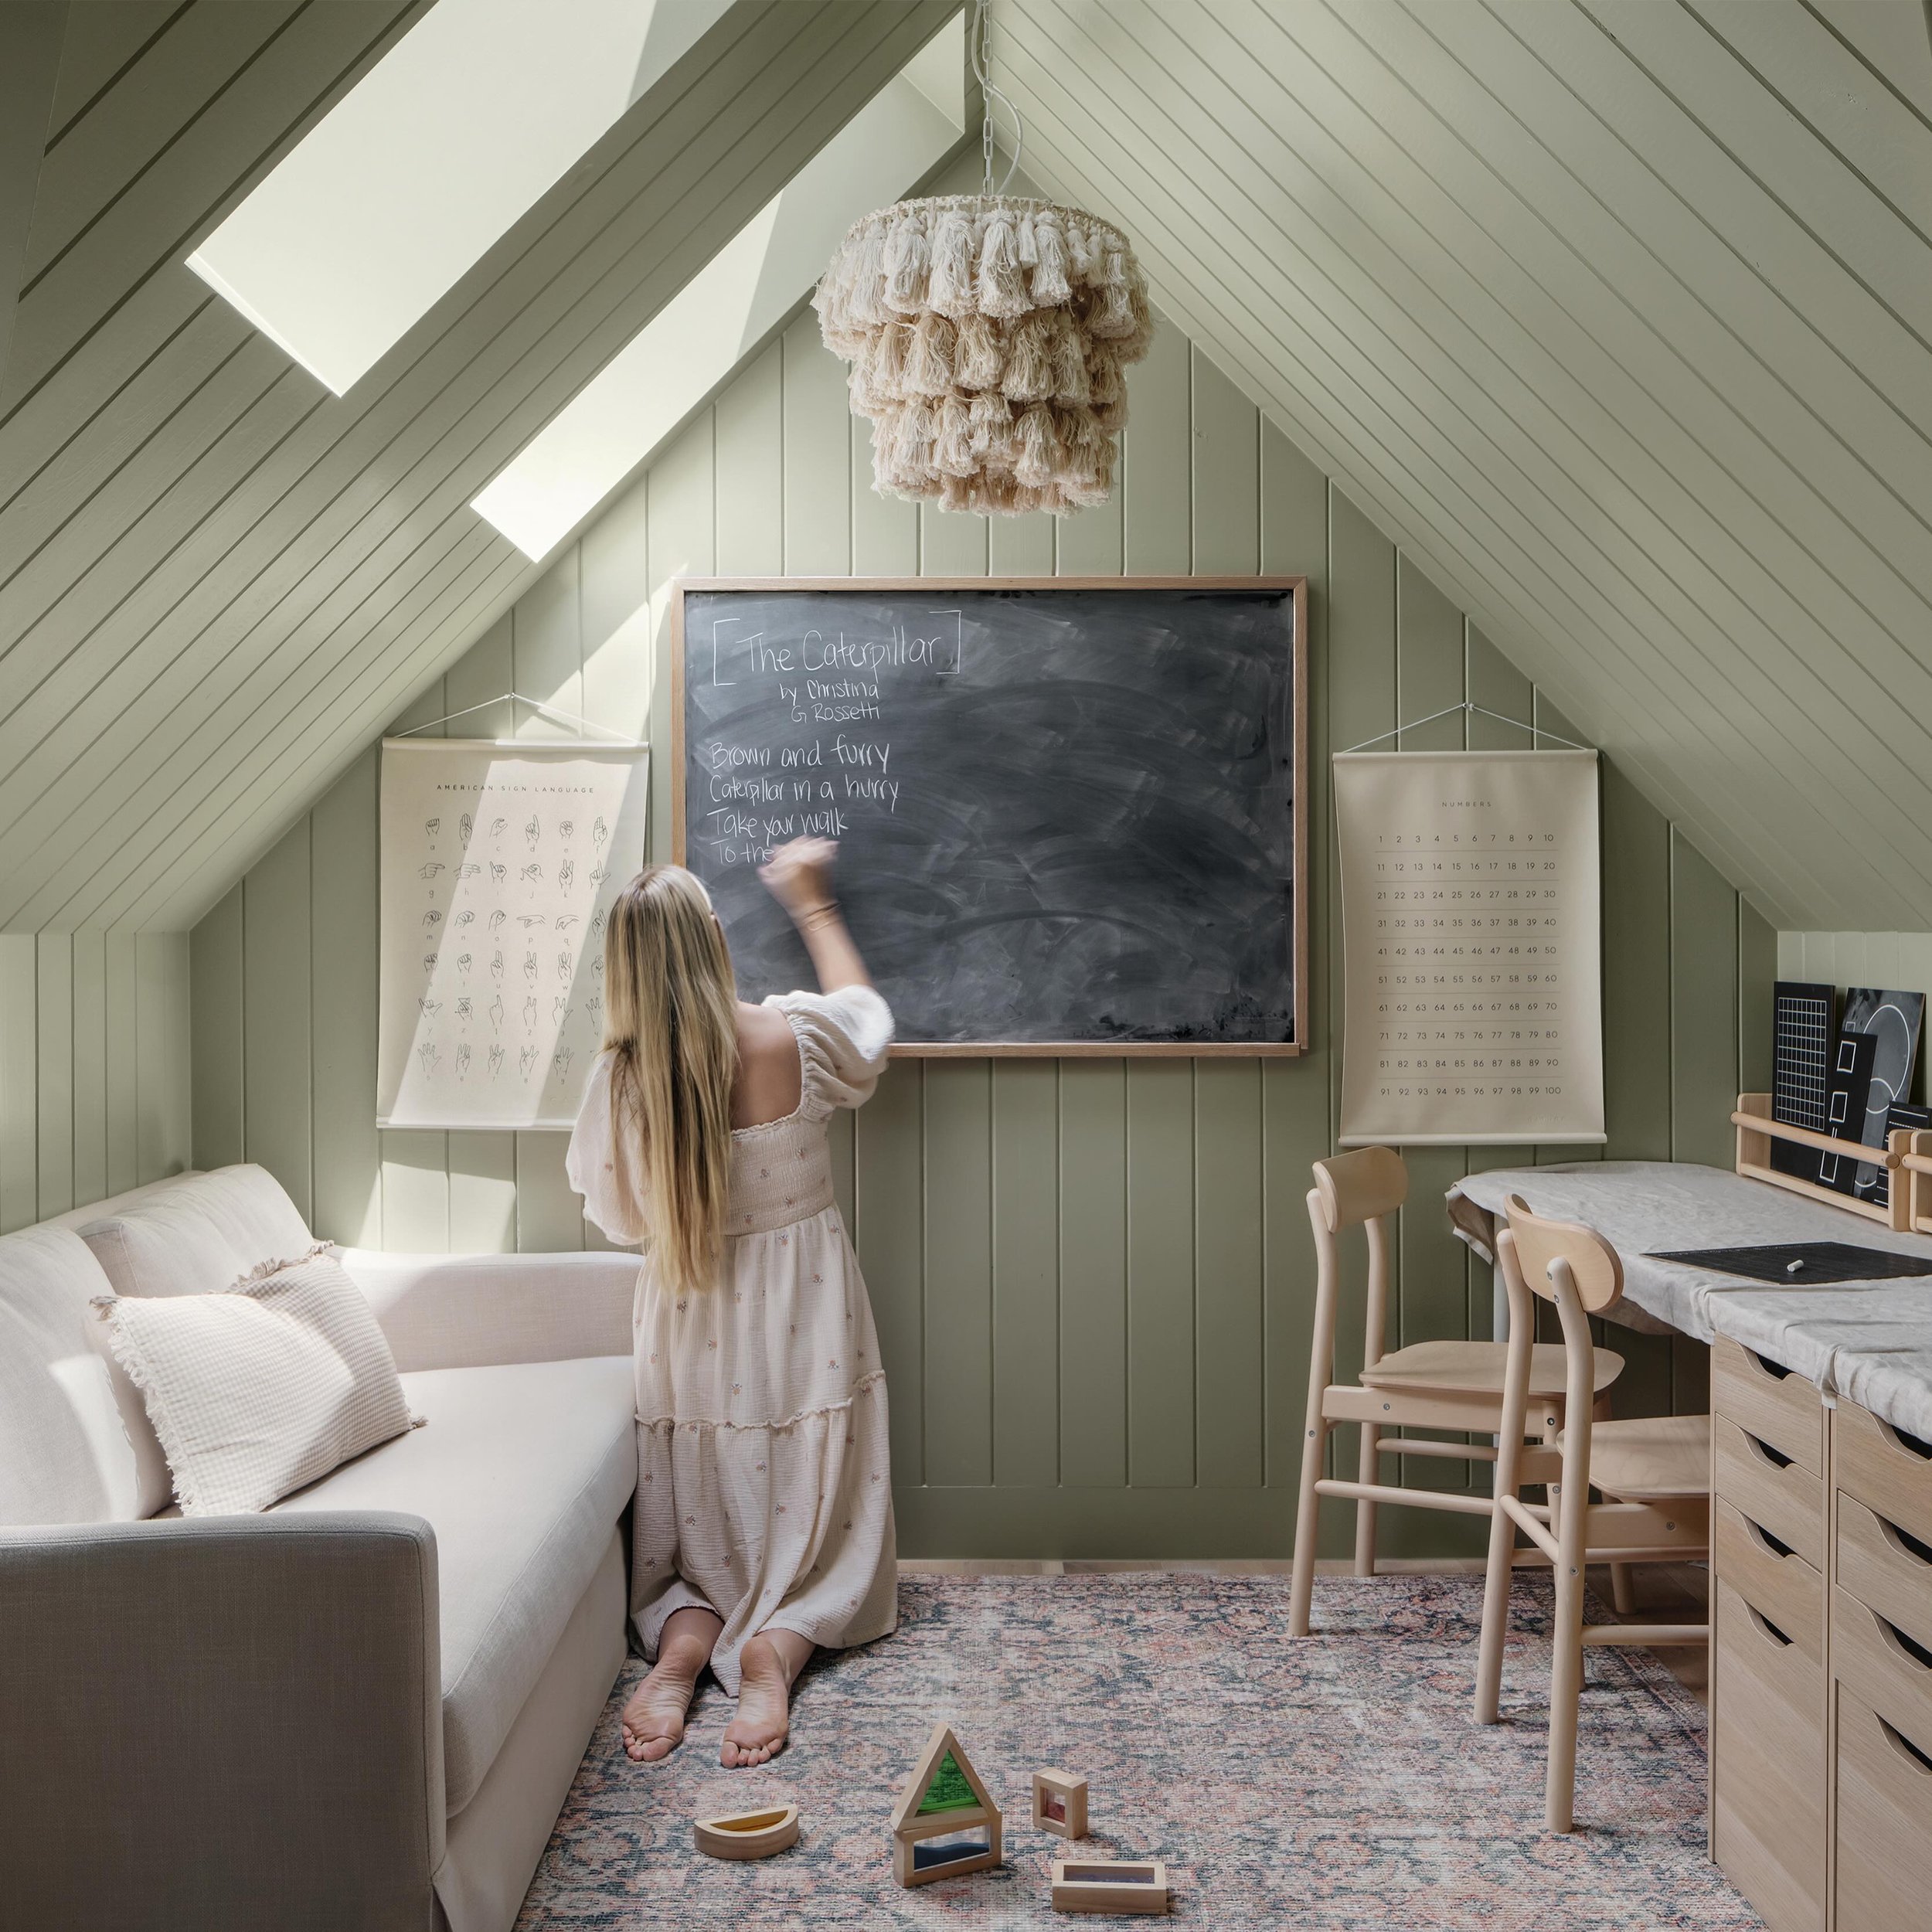 The dreamiest schoolroom imaginable! The family in our #Clawsonproject specifically wanted a space where their kids could play, create, learn, and use their imaginations to the fullest. What would your dream home have? Let us know in the comments! 💭